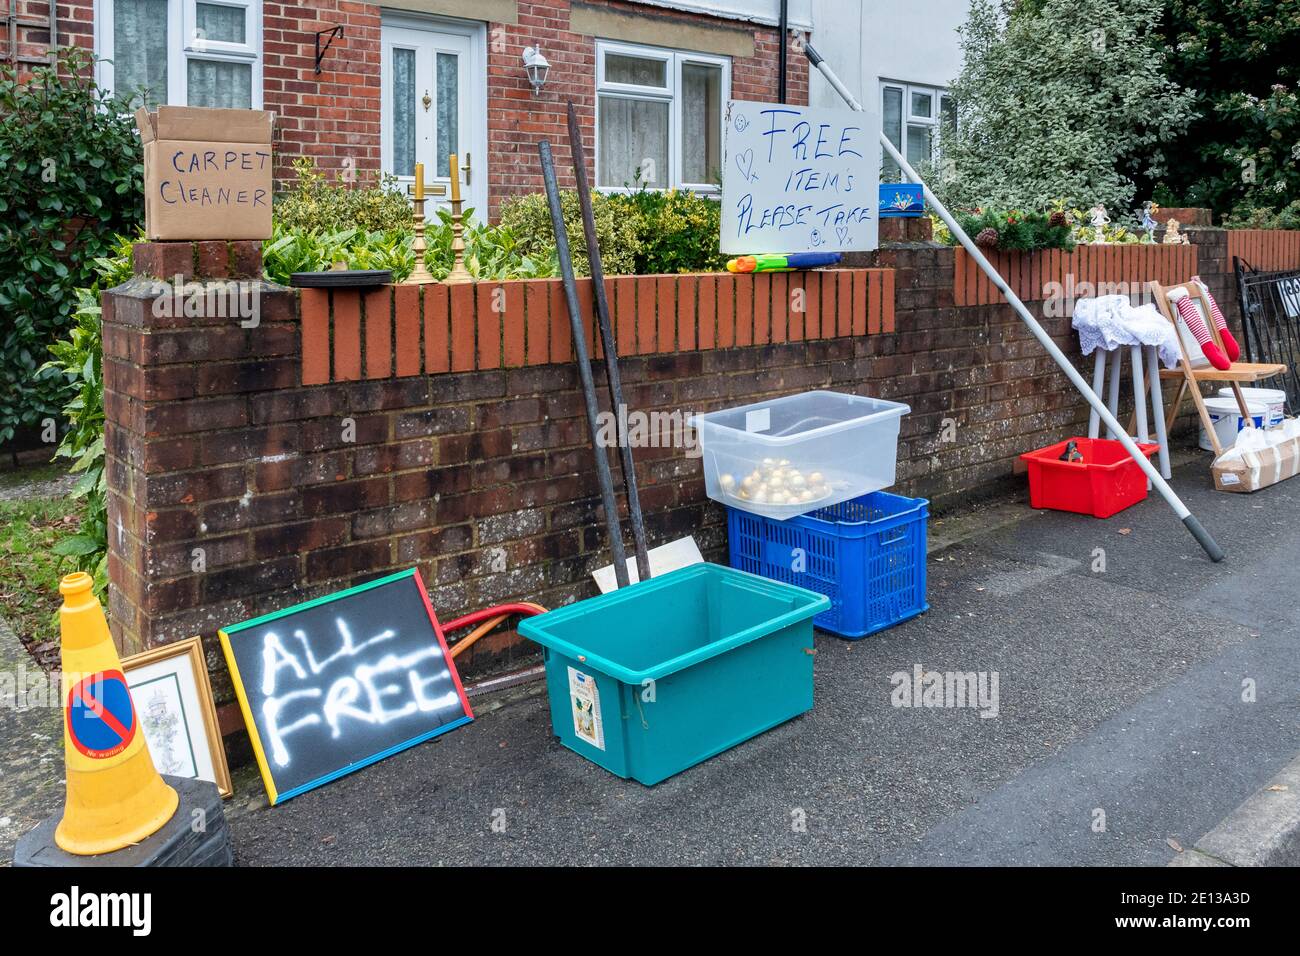 Collection of everyday items being given away for free outside a house, UK Stock Photo